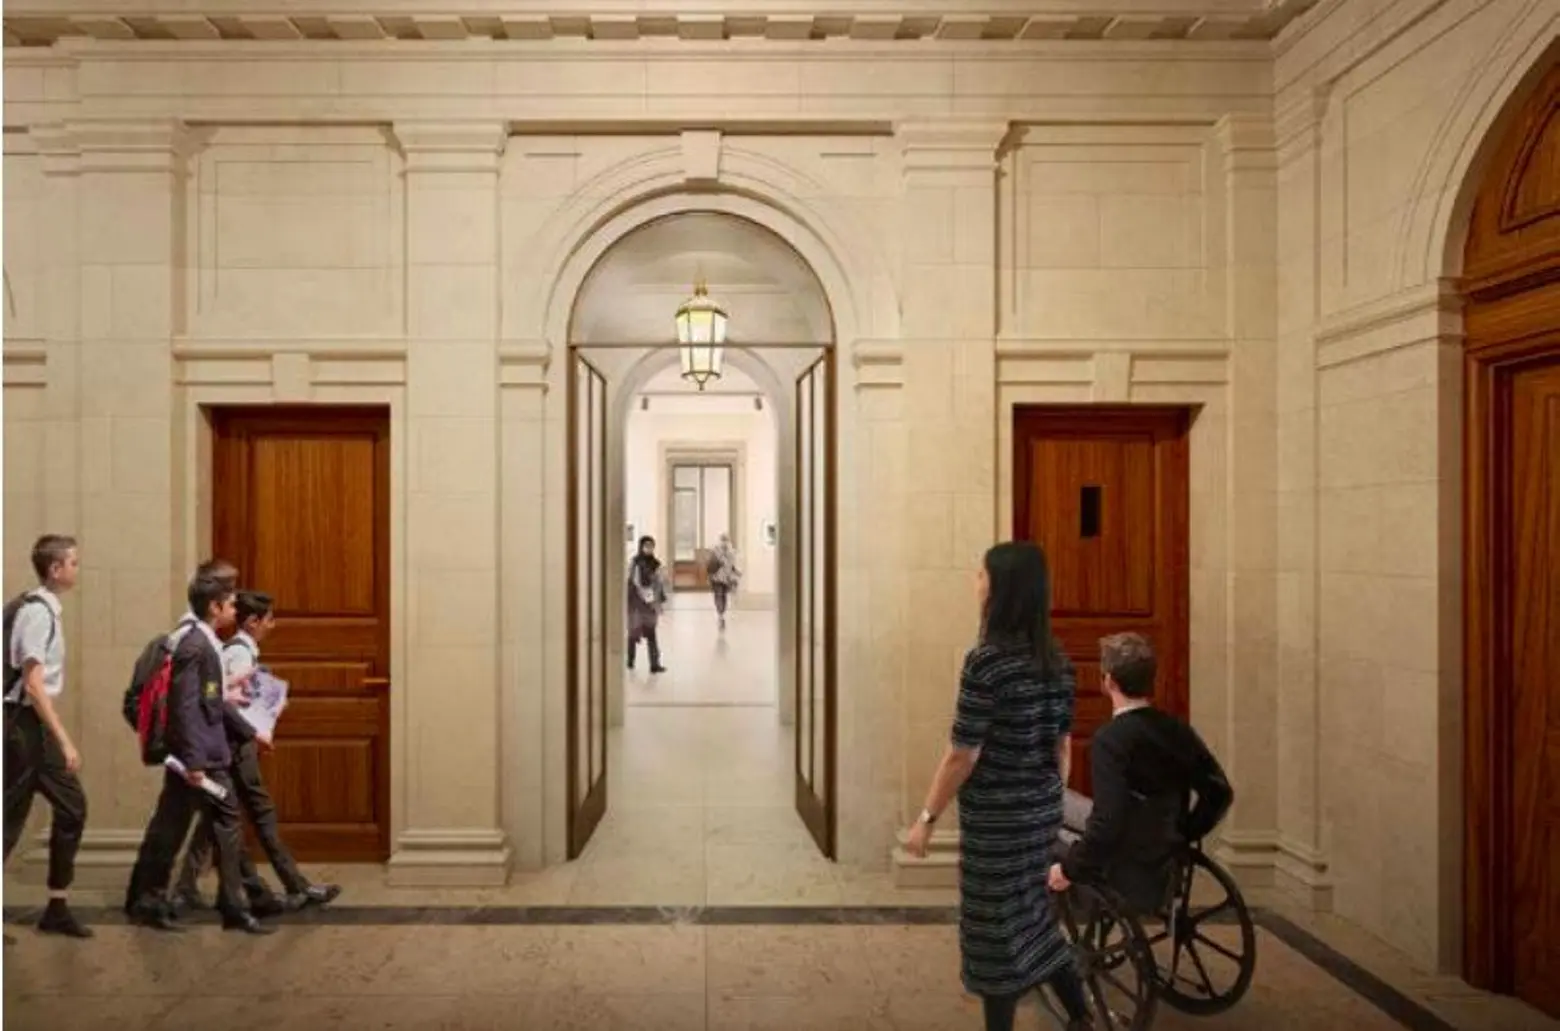 Frick Collection, expansion rendering